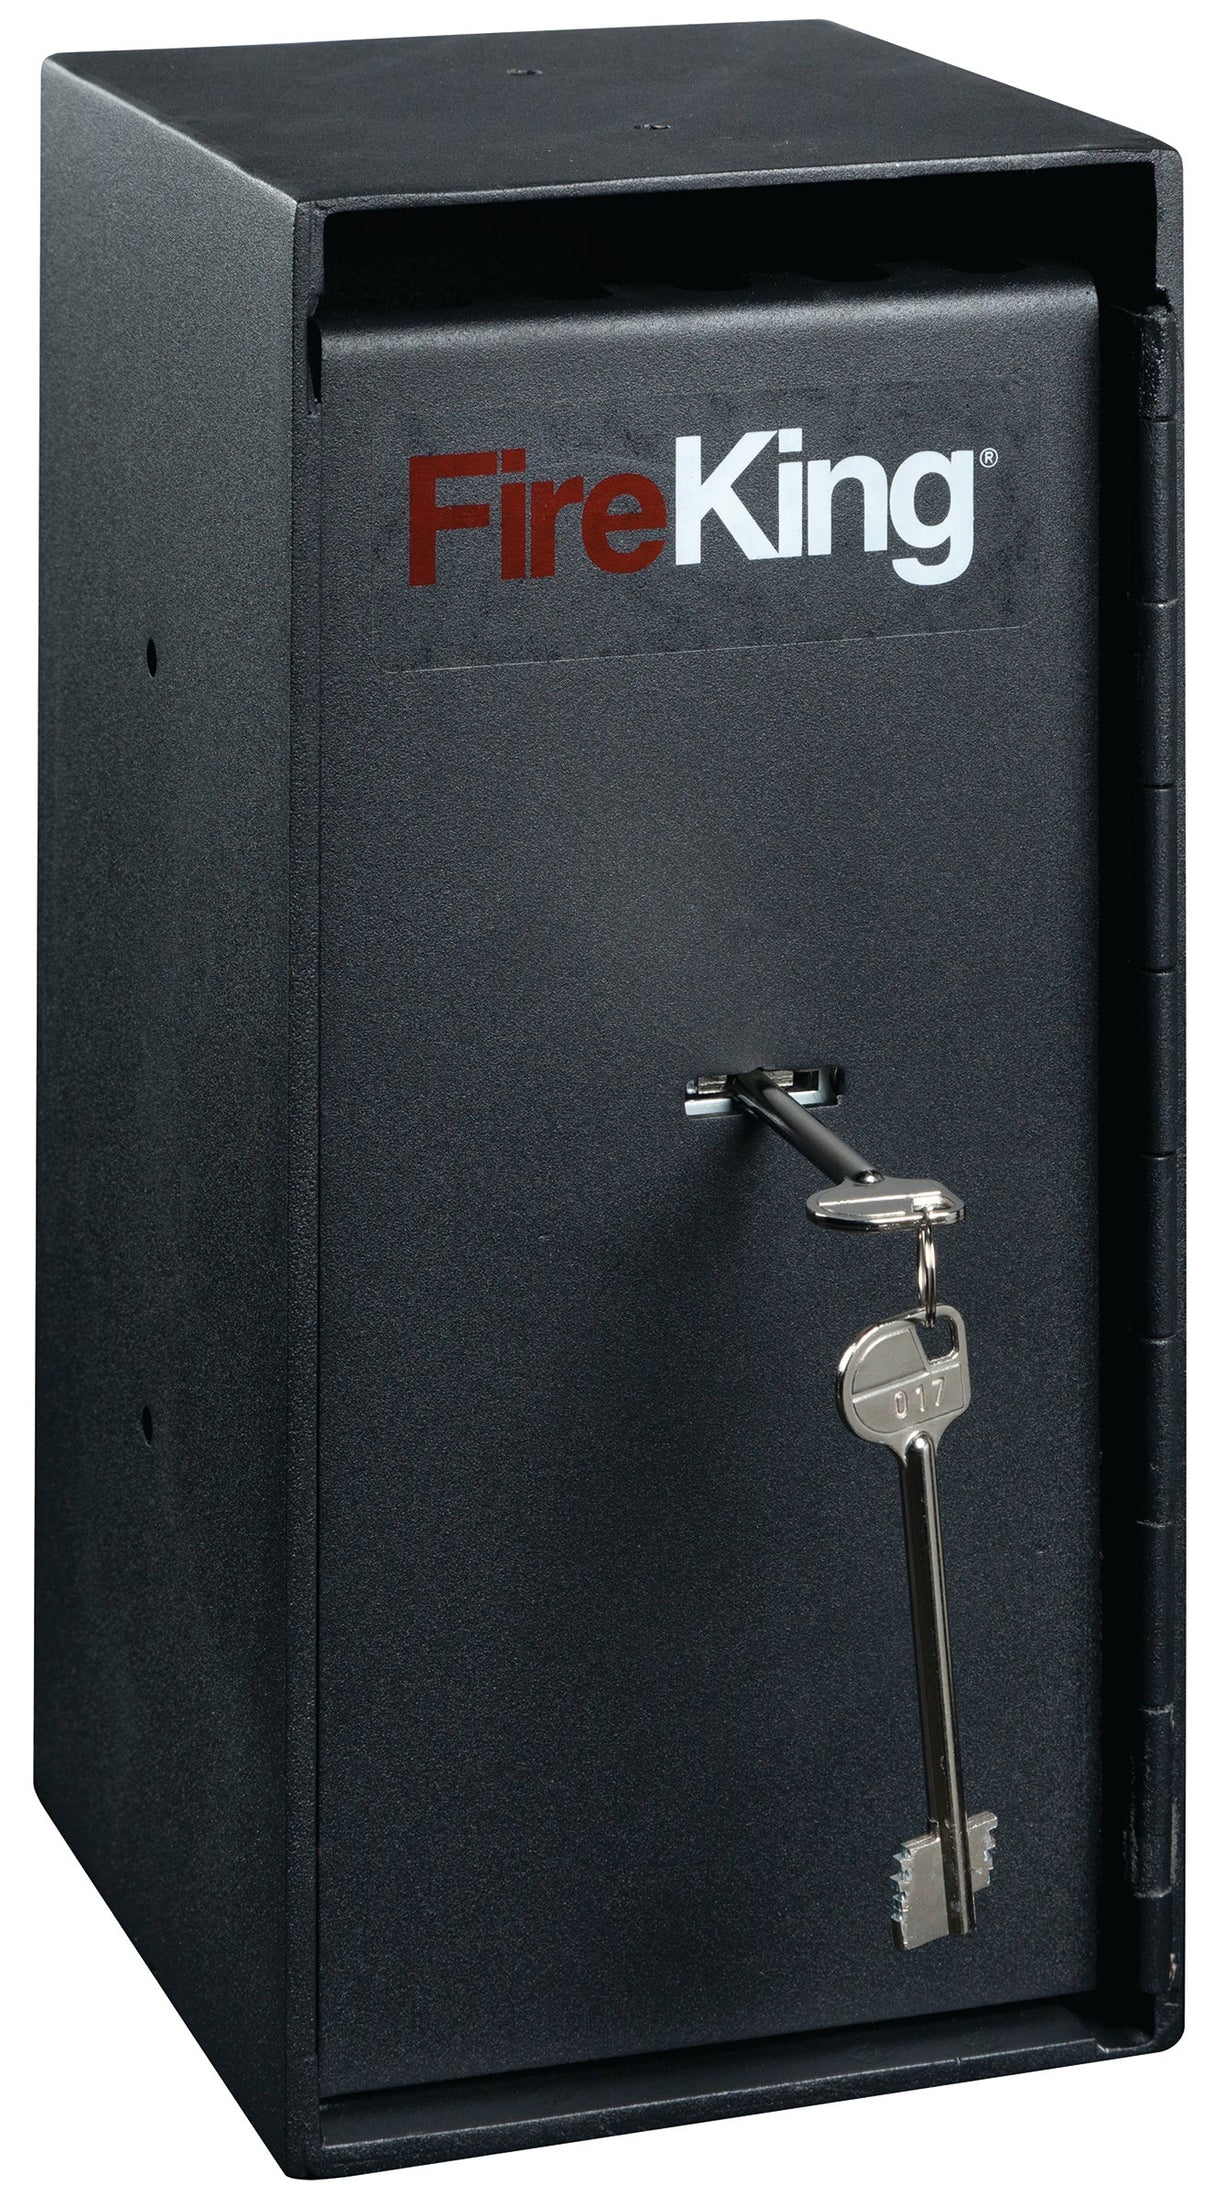 FireKing MS1206 Fire-Rated Cash Depository Safe